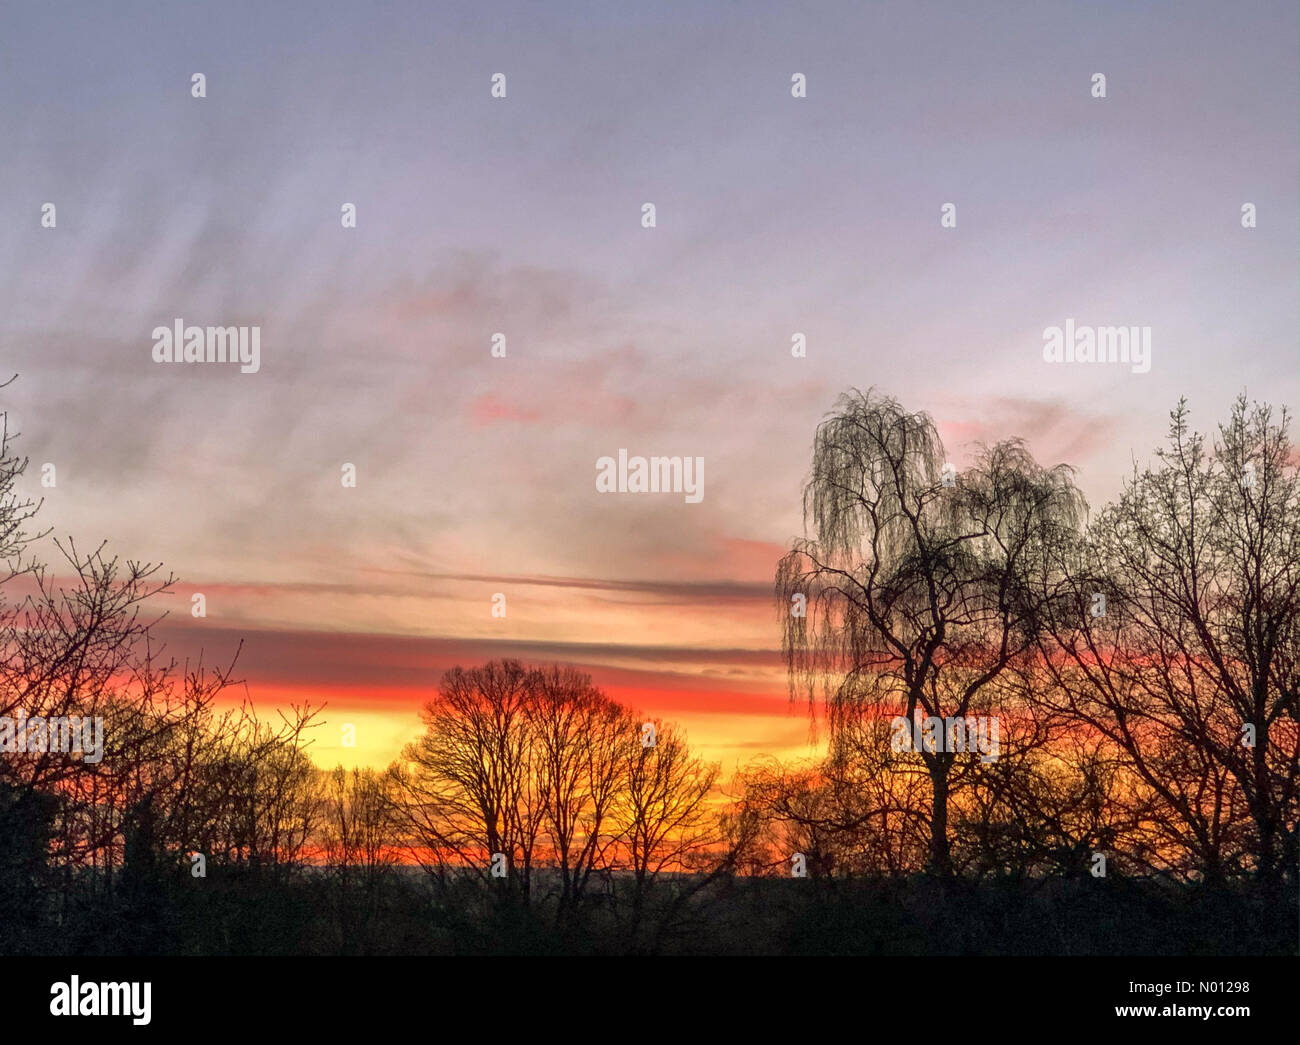 UK Weather: Sunset over Godalming. Sycamore Avenue, Godalming. 18th January 2020. A beautiful end to the day for the Home Counties. Sunset over Tuesley Farm in Godalming, Surrey. Credit: jamesjagger/StockimoNews/Alamy Live News Stock Photo